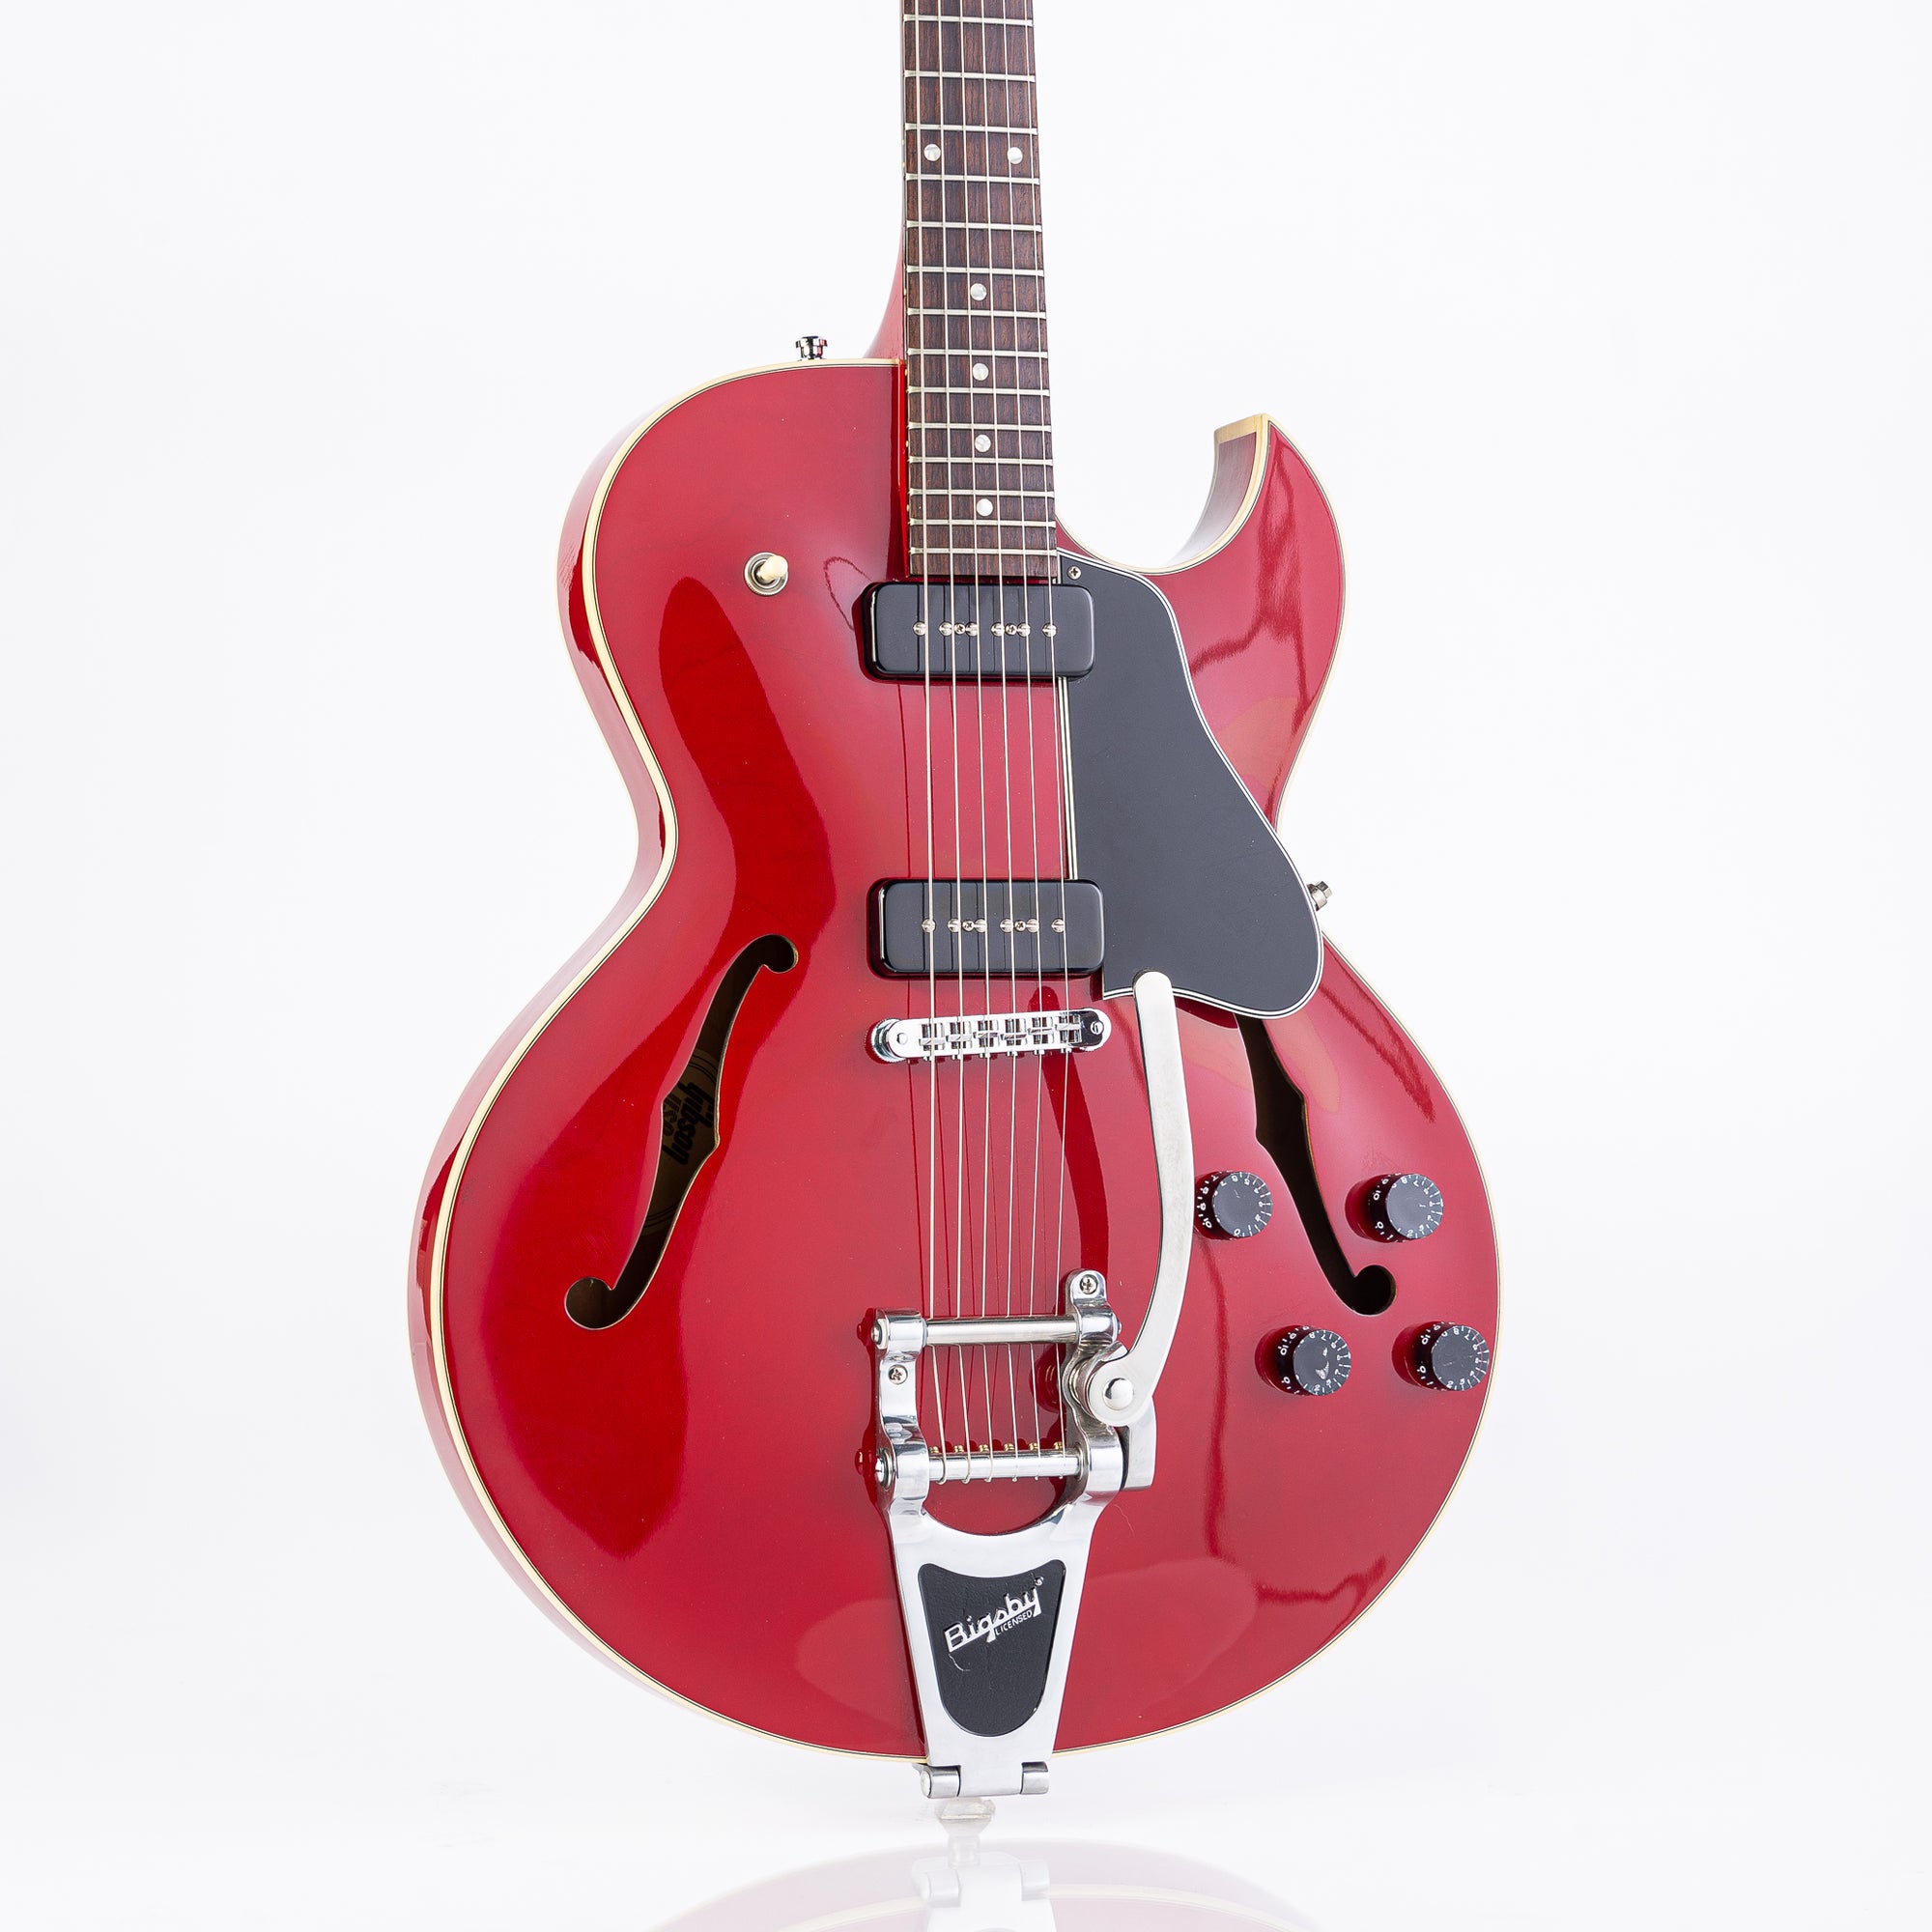 USED Gibson ES-135 Semi-hollow Electric Guitar with Bigsby Tremolo 1997- Transparent Cherry Red with HSC